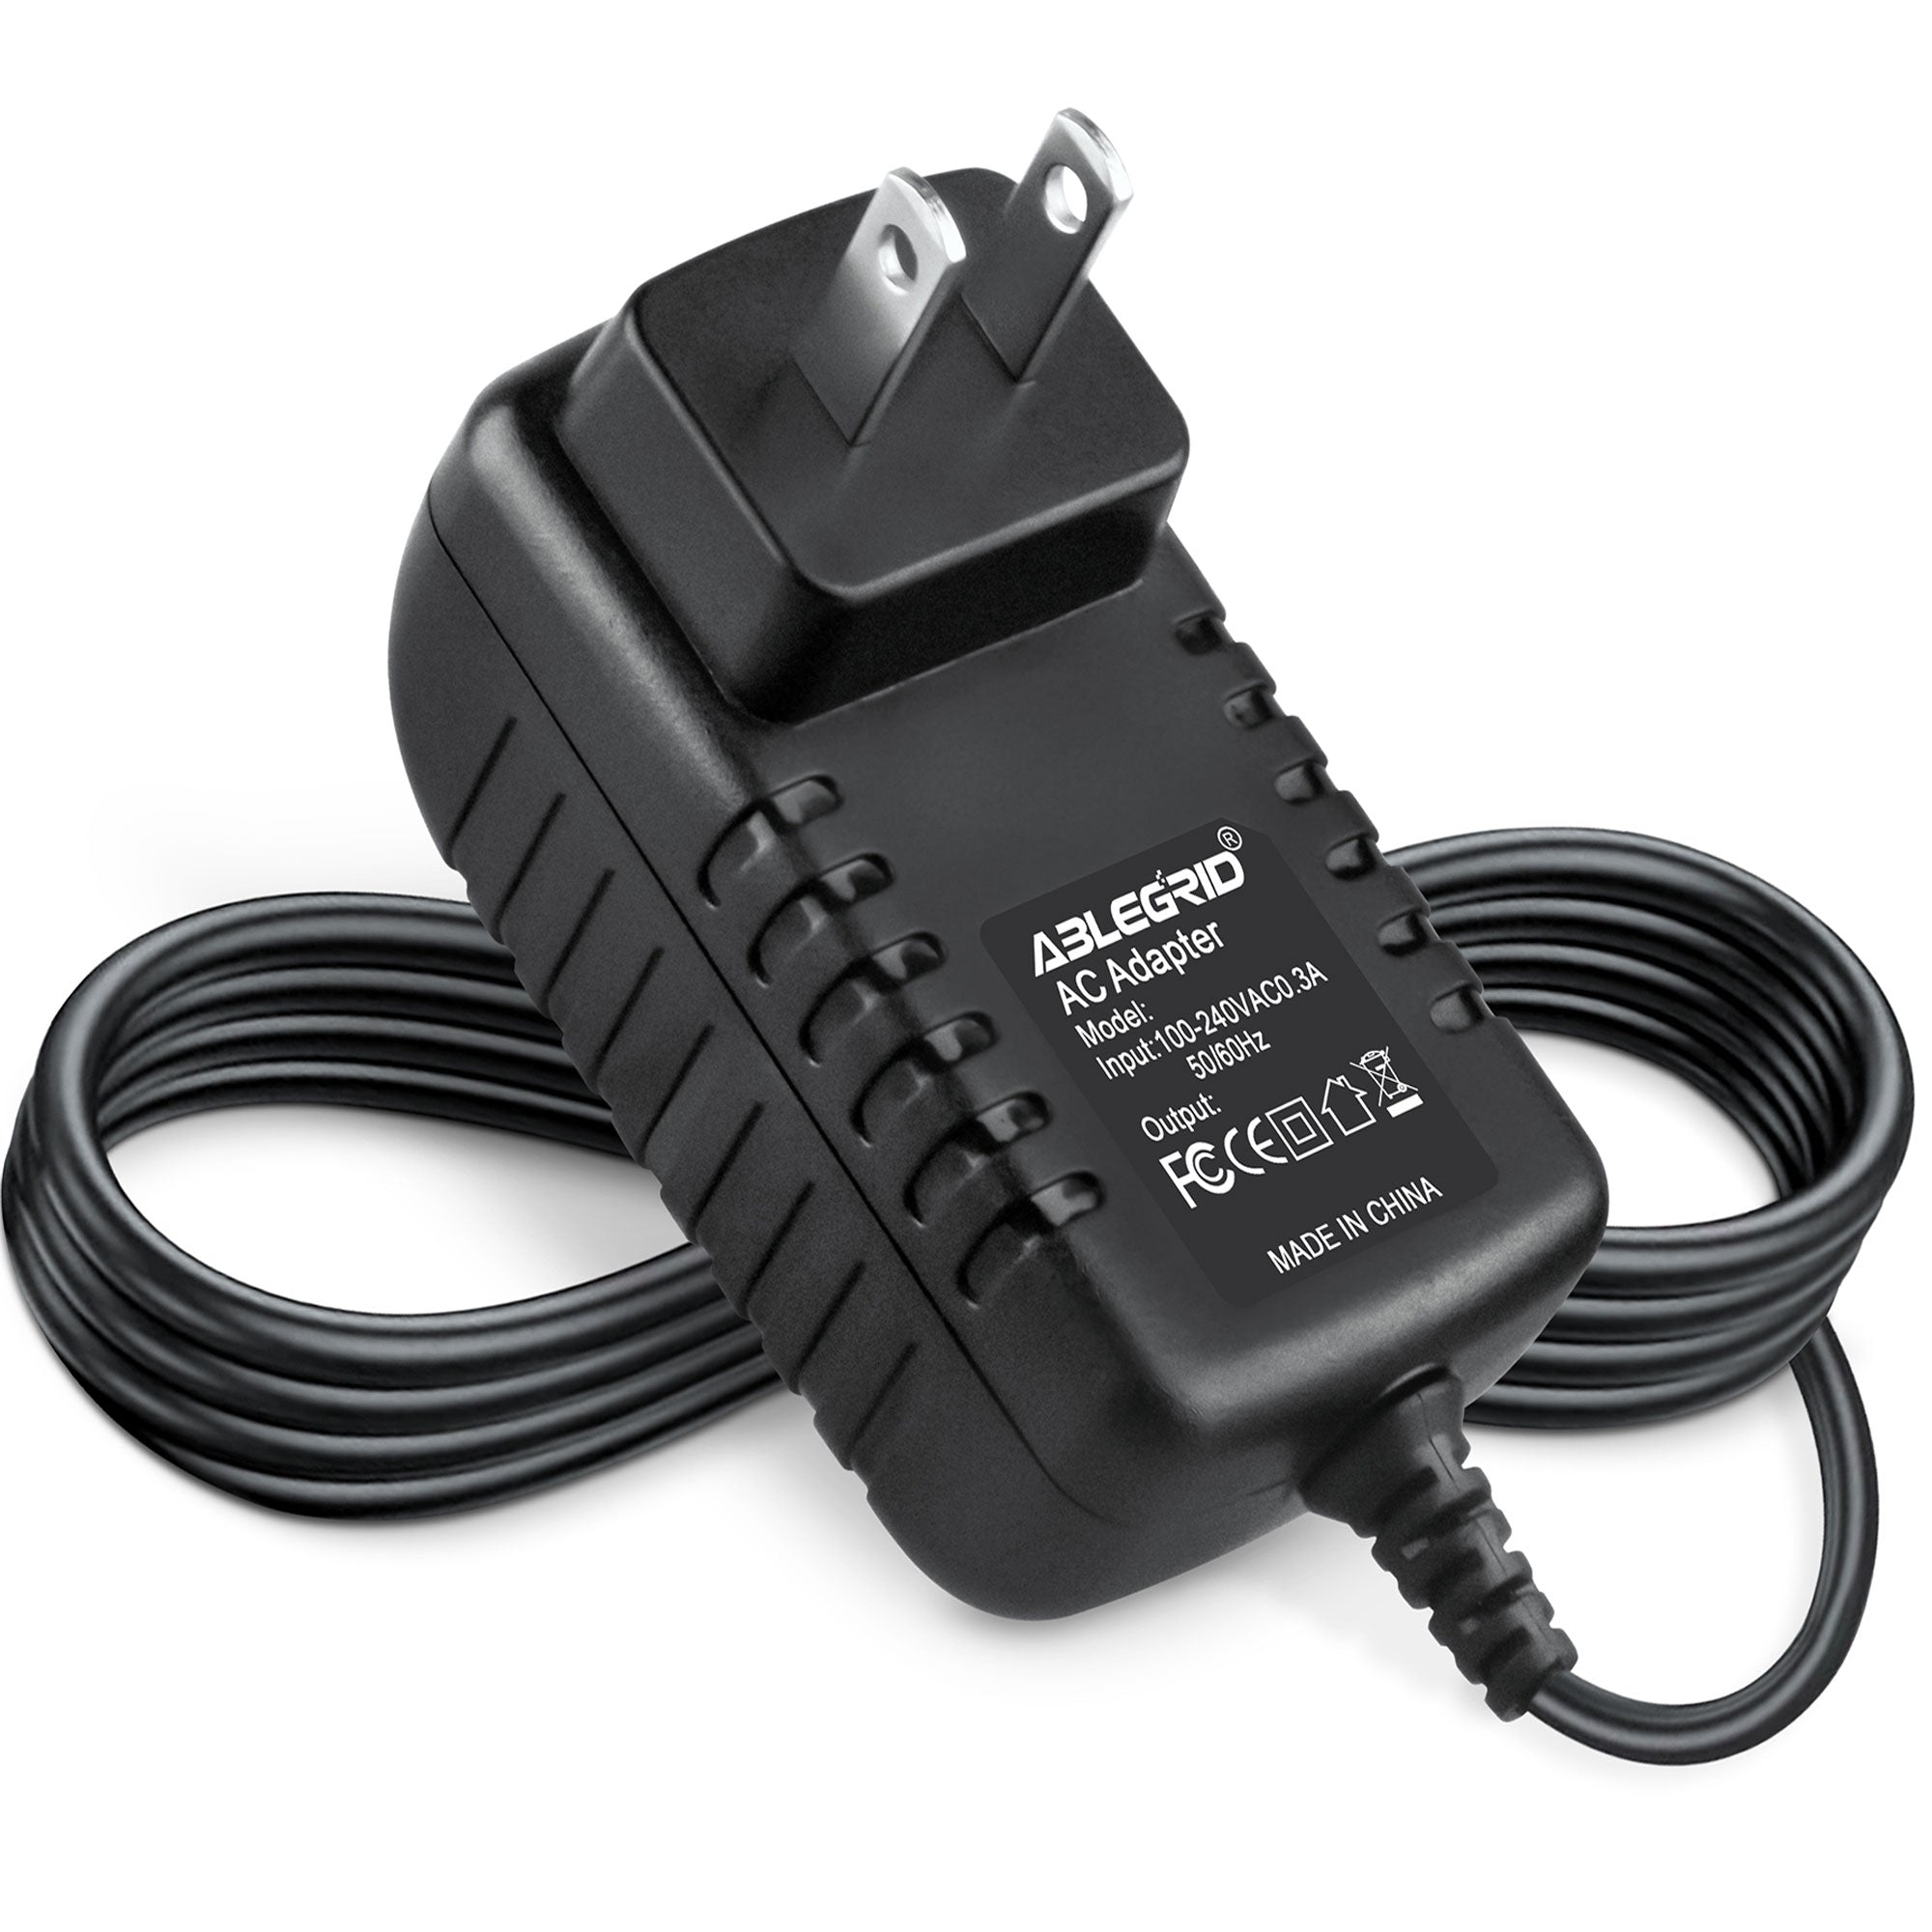 AbleGrid AC-DC Adapter for dogtra Model: AEC-4112B AEC-41128 Class 2 Transformer Fits Dog Fence System Universal Power Supply Cord Cable Battery Wall Charger Input: 100 - 240 VAC Worldwide Use Mains PSU